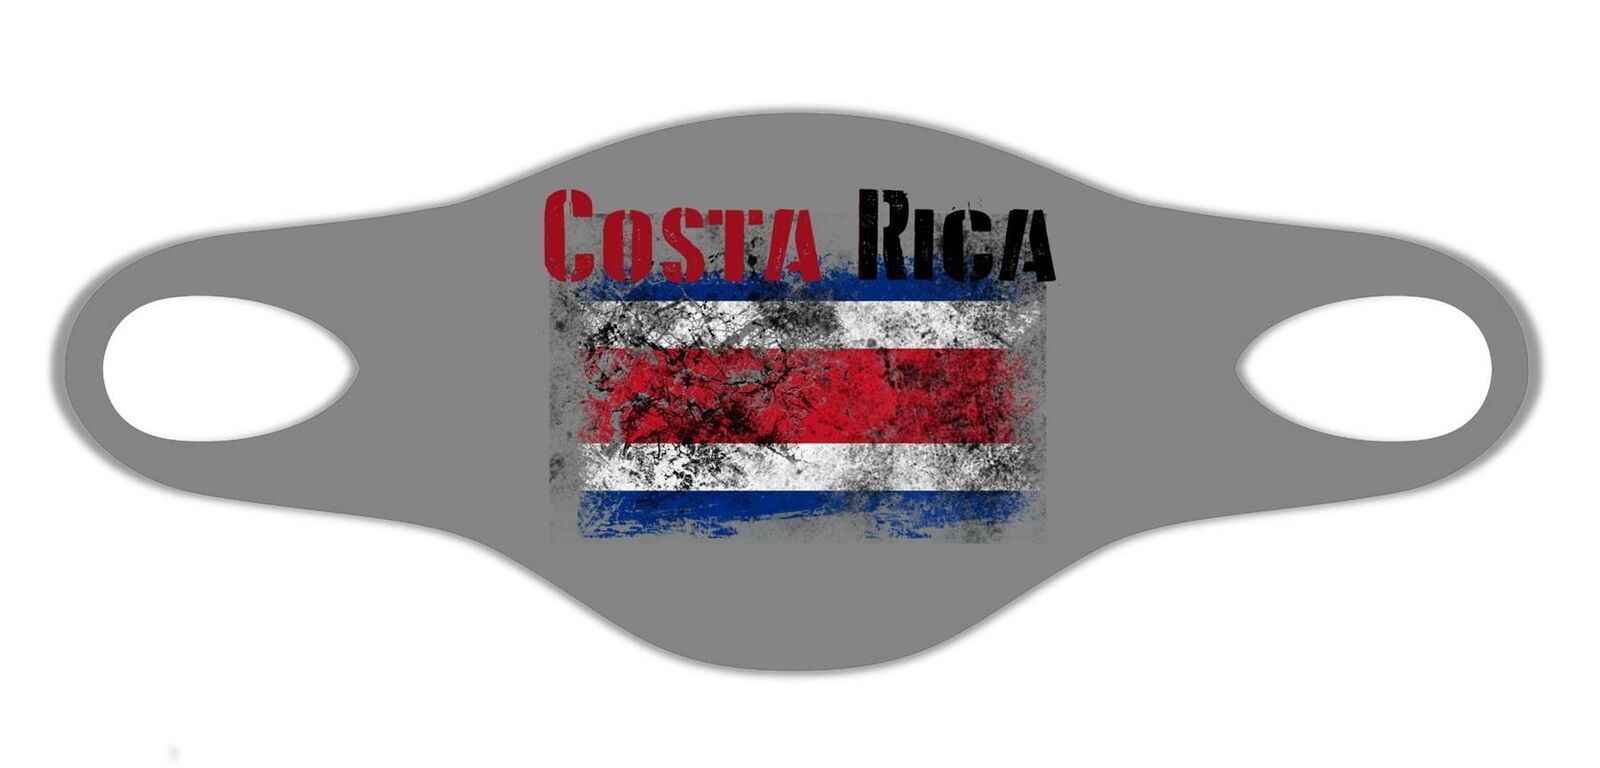 Costa Rica National Flag Soft Face Mask Protective Reusable washable Breathable